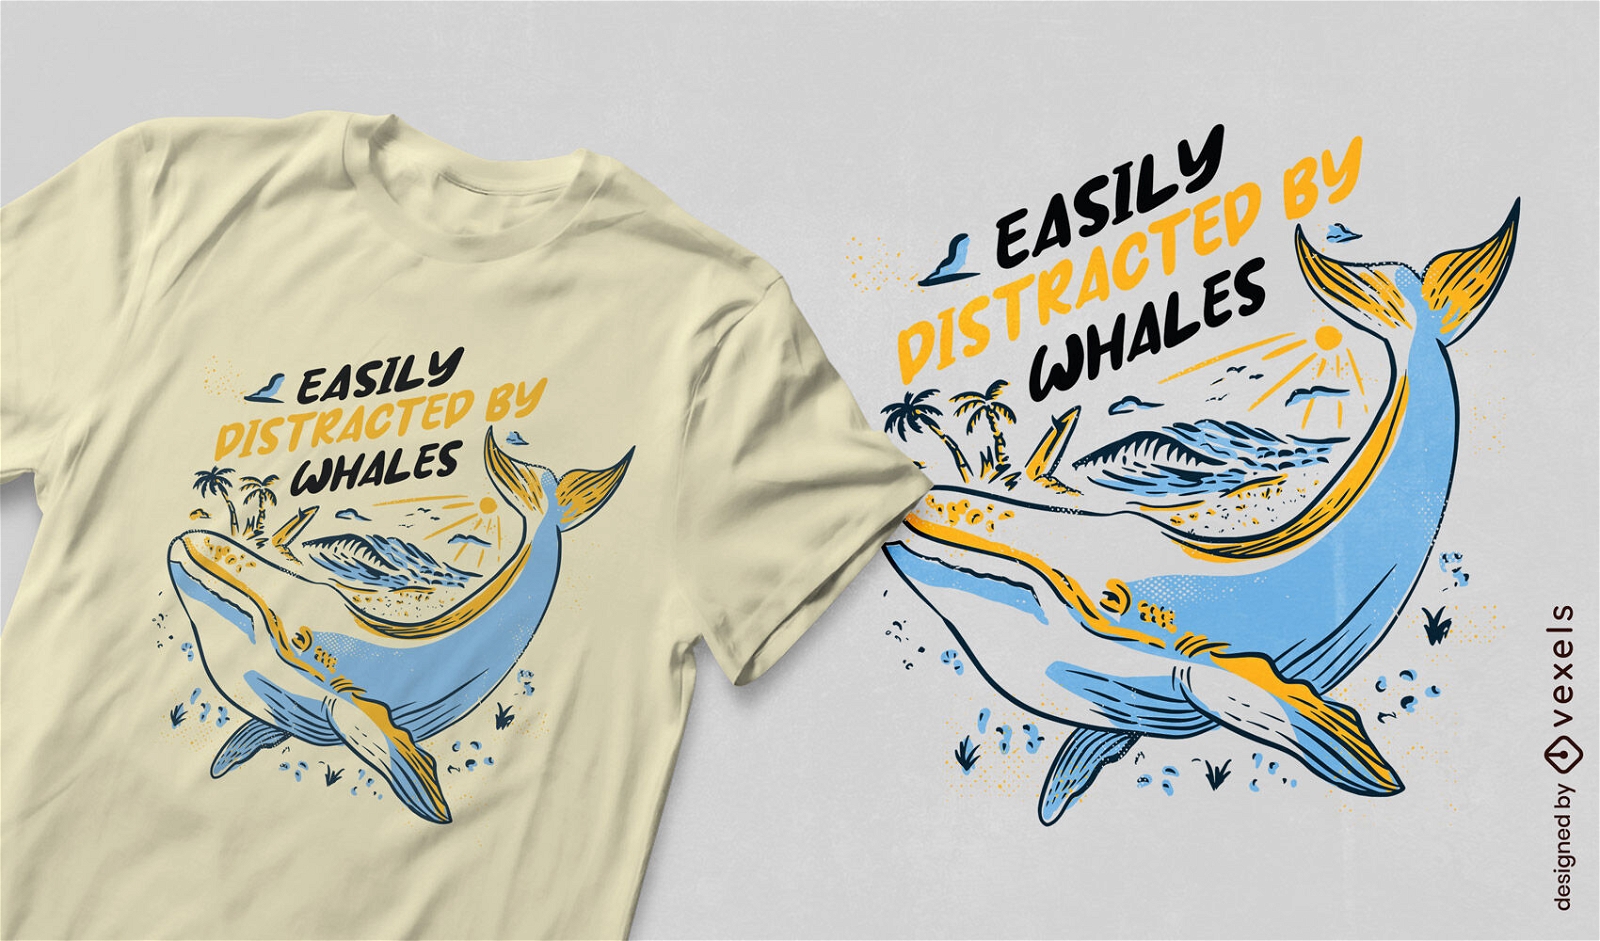 Whimsical whale distraction quote t-shirt design